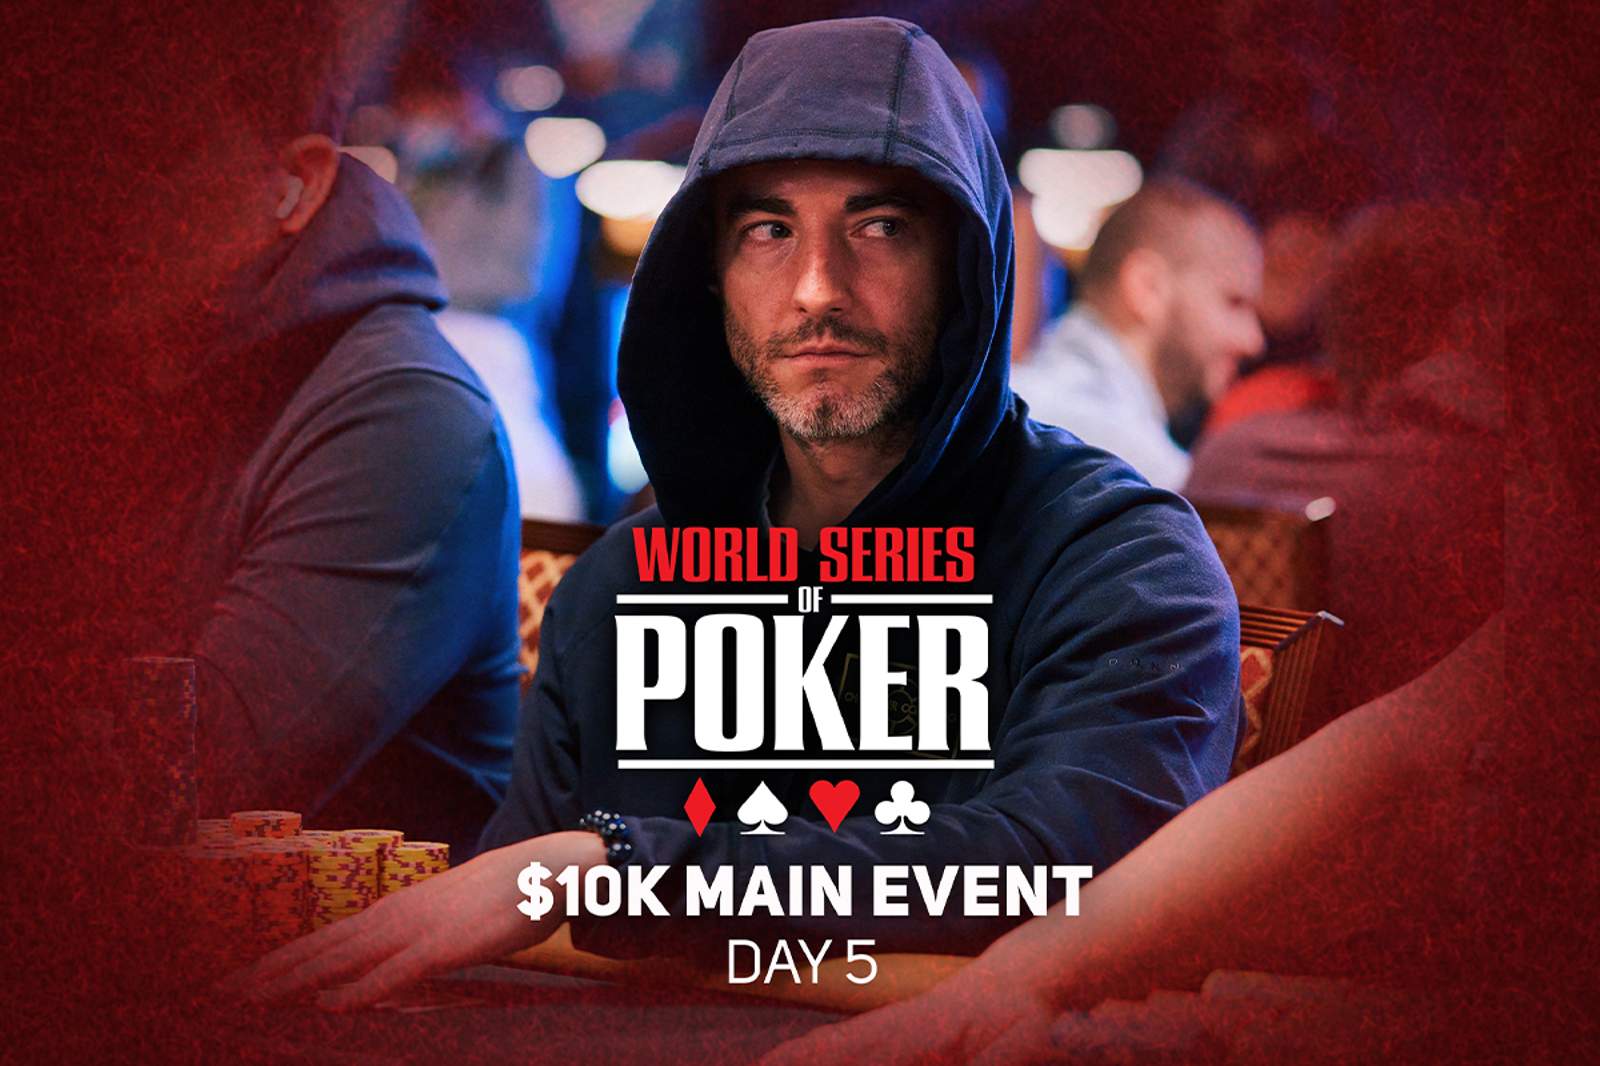 Watch Day 5 of the 2021 WSOP Main Event on PokerGO.com at 6 p.m. ET